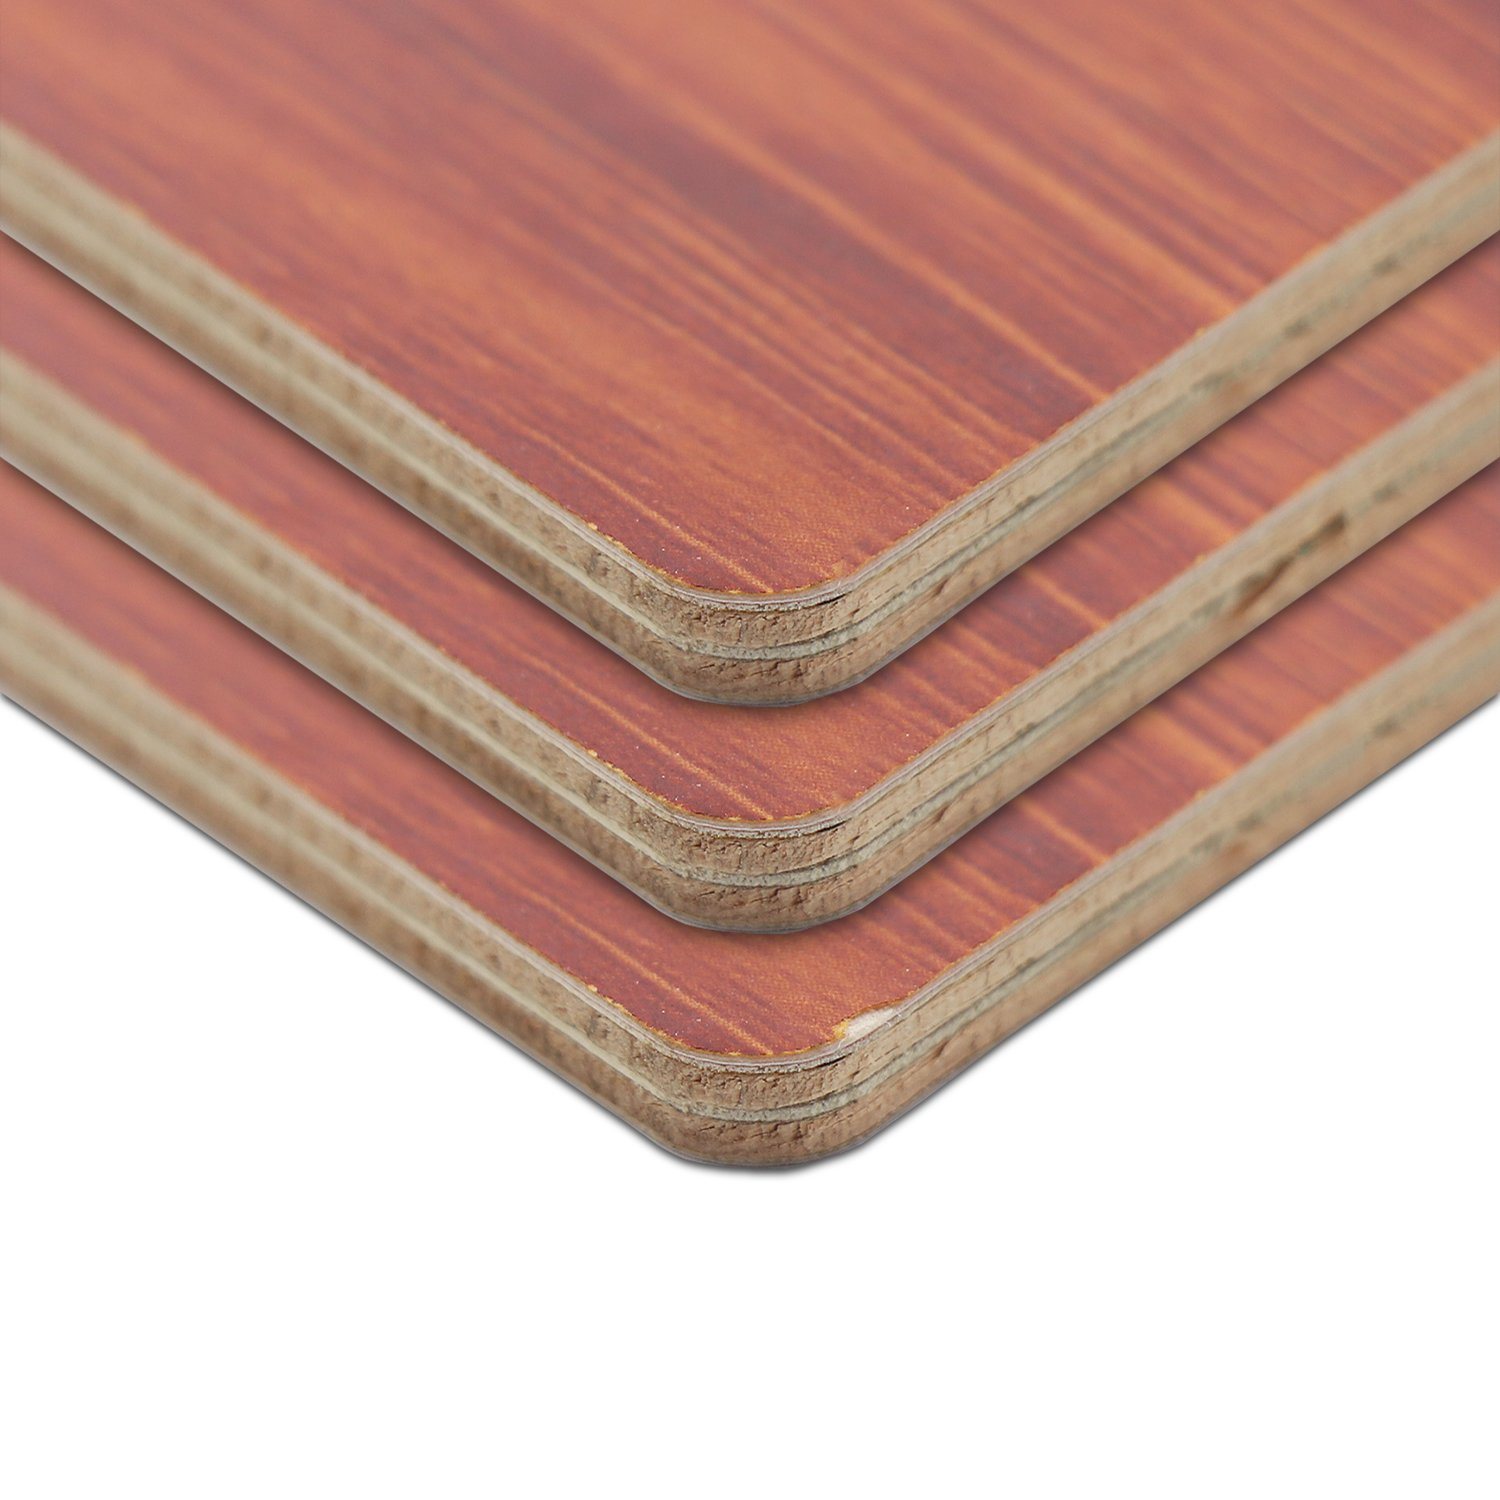 Wood Grain Faced Melamine Plywood Board High Gloss Plywood for Furniture